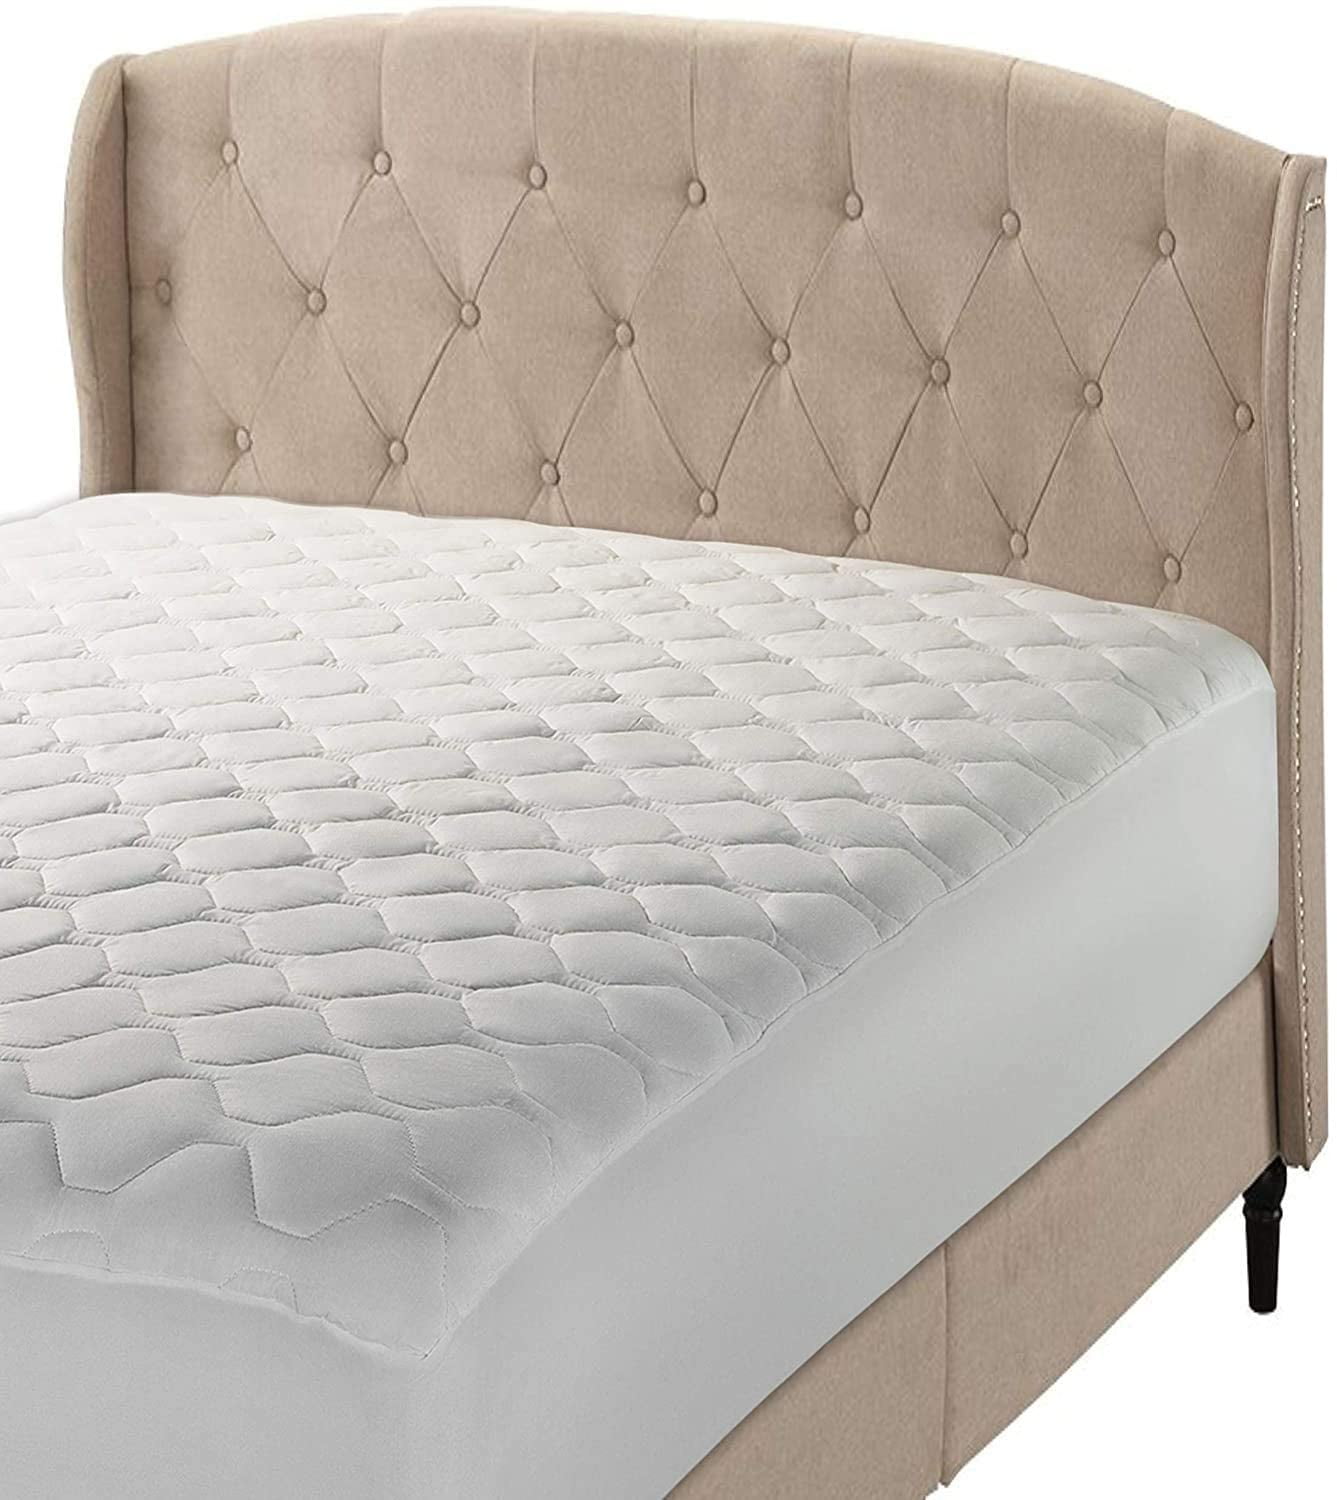 The Grand Full Mattress Pad Cover, Grand King Sleep Number Bed